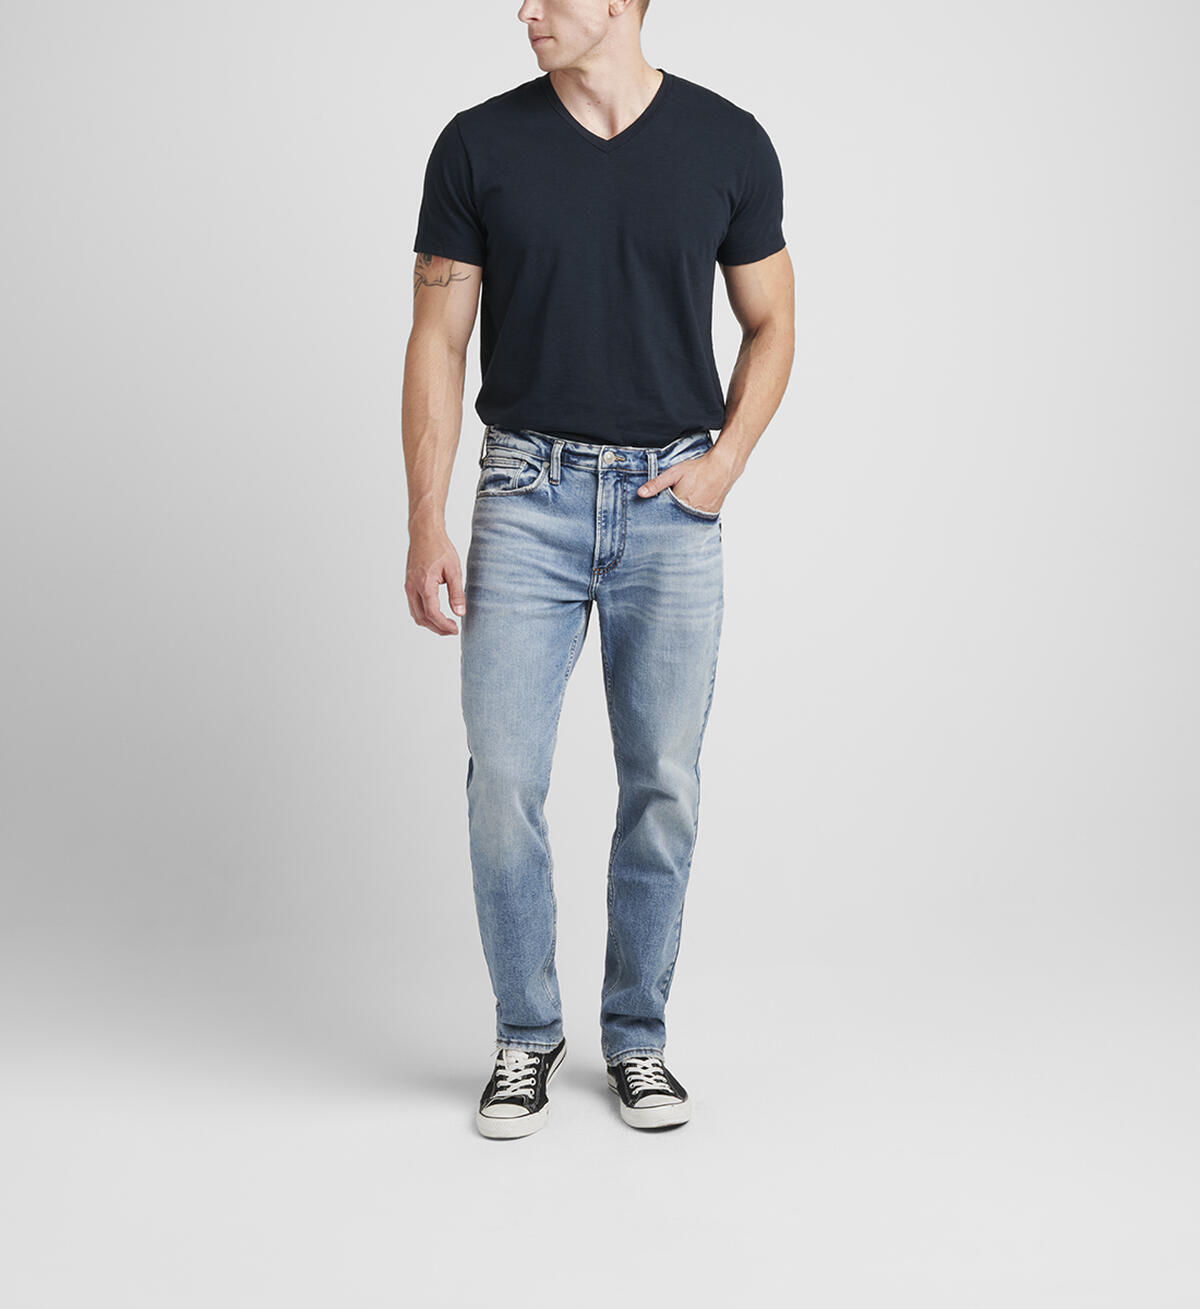 Machray Classic Fit Straight Leg Jeans, , hi-res image number 0